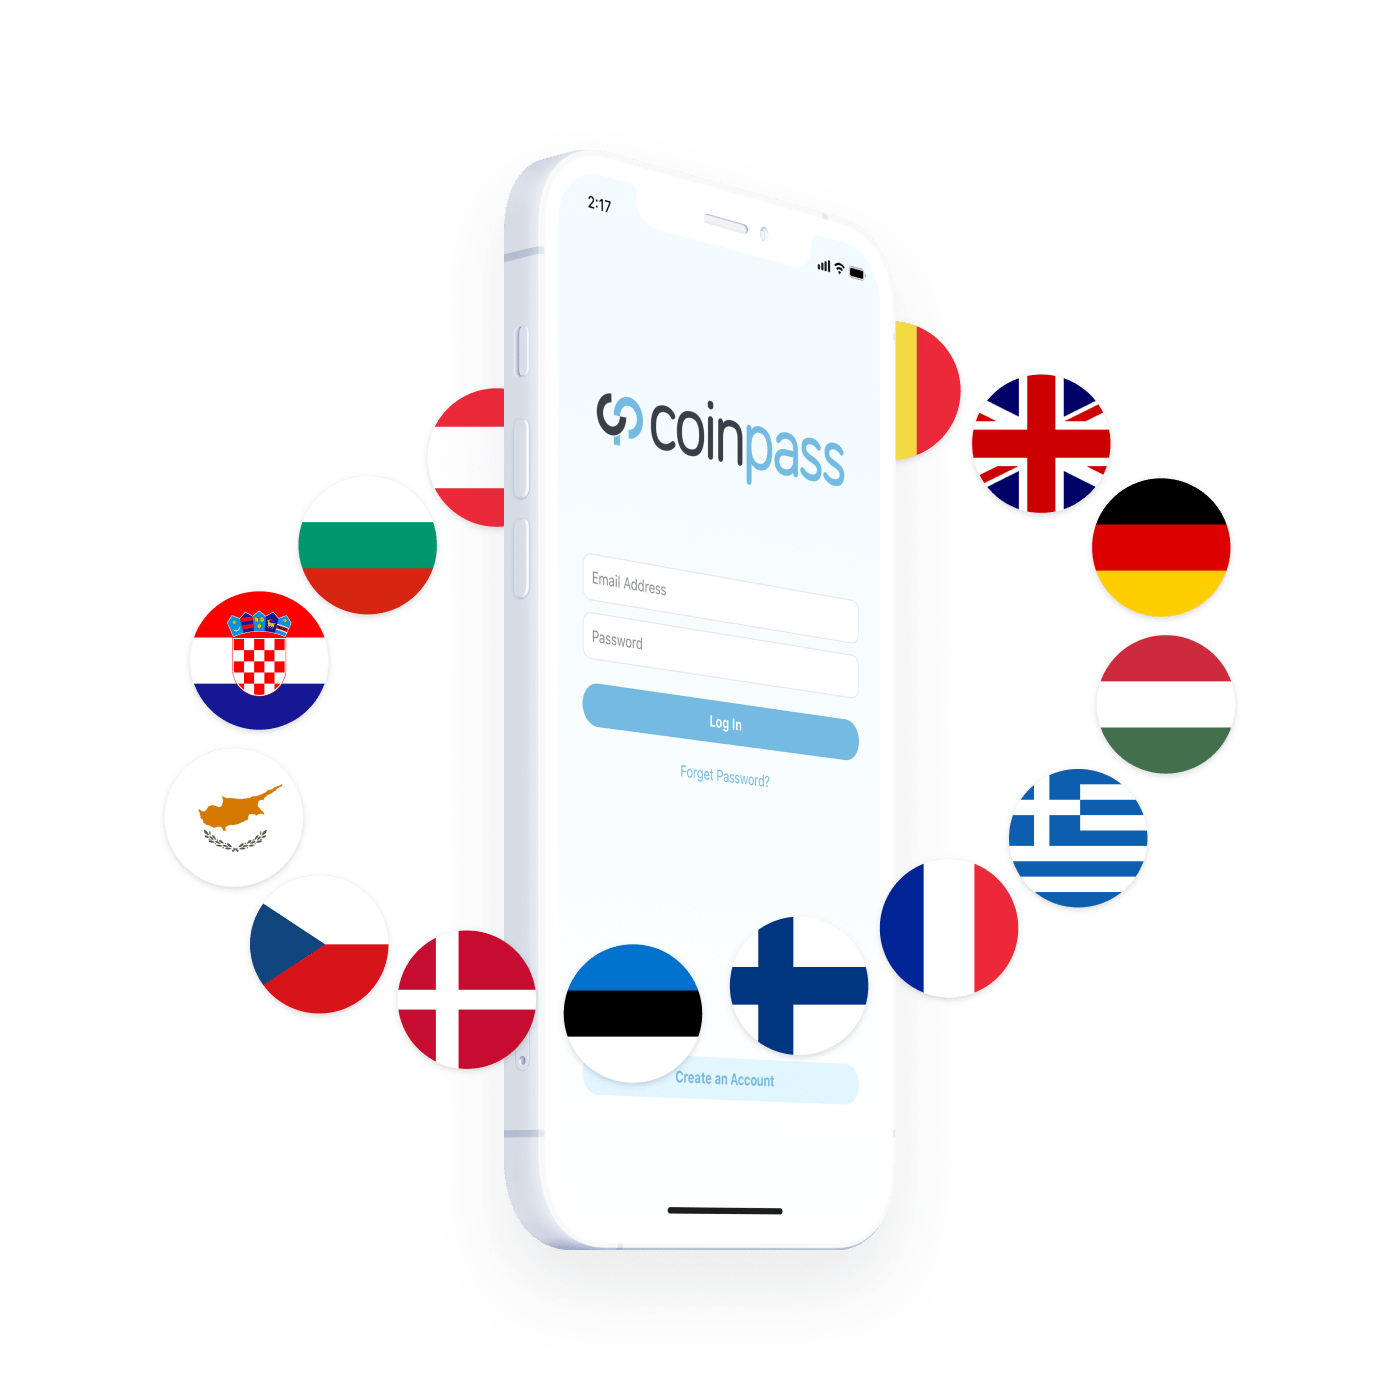 coinpass supporting the uk, europe and beyond